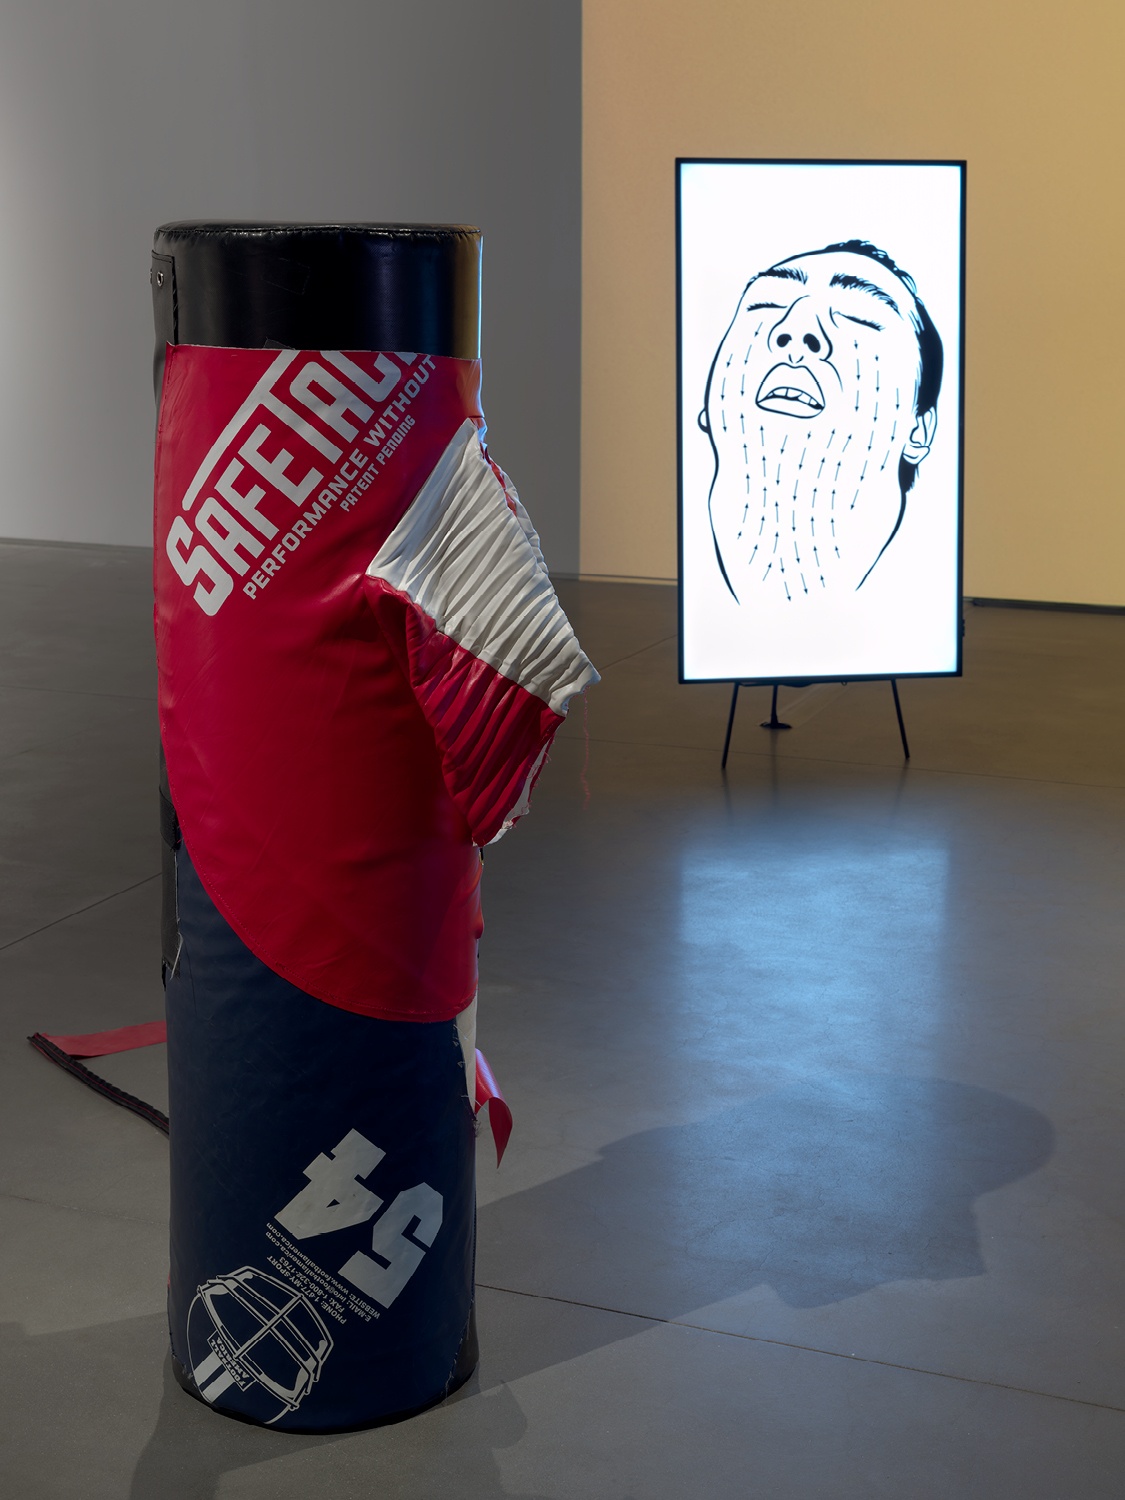 A tackling dummy that has been restitched stands upright with a vertical video monitor in the background that depicts a drawing of a man's face turned upward